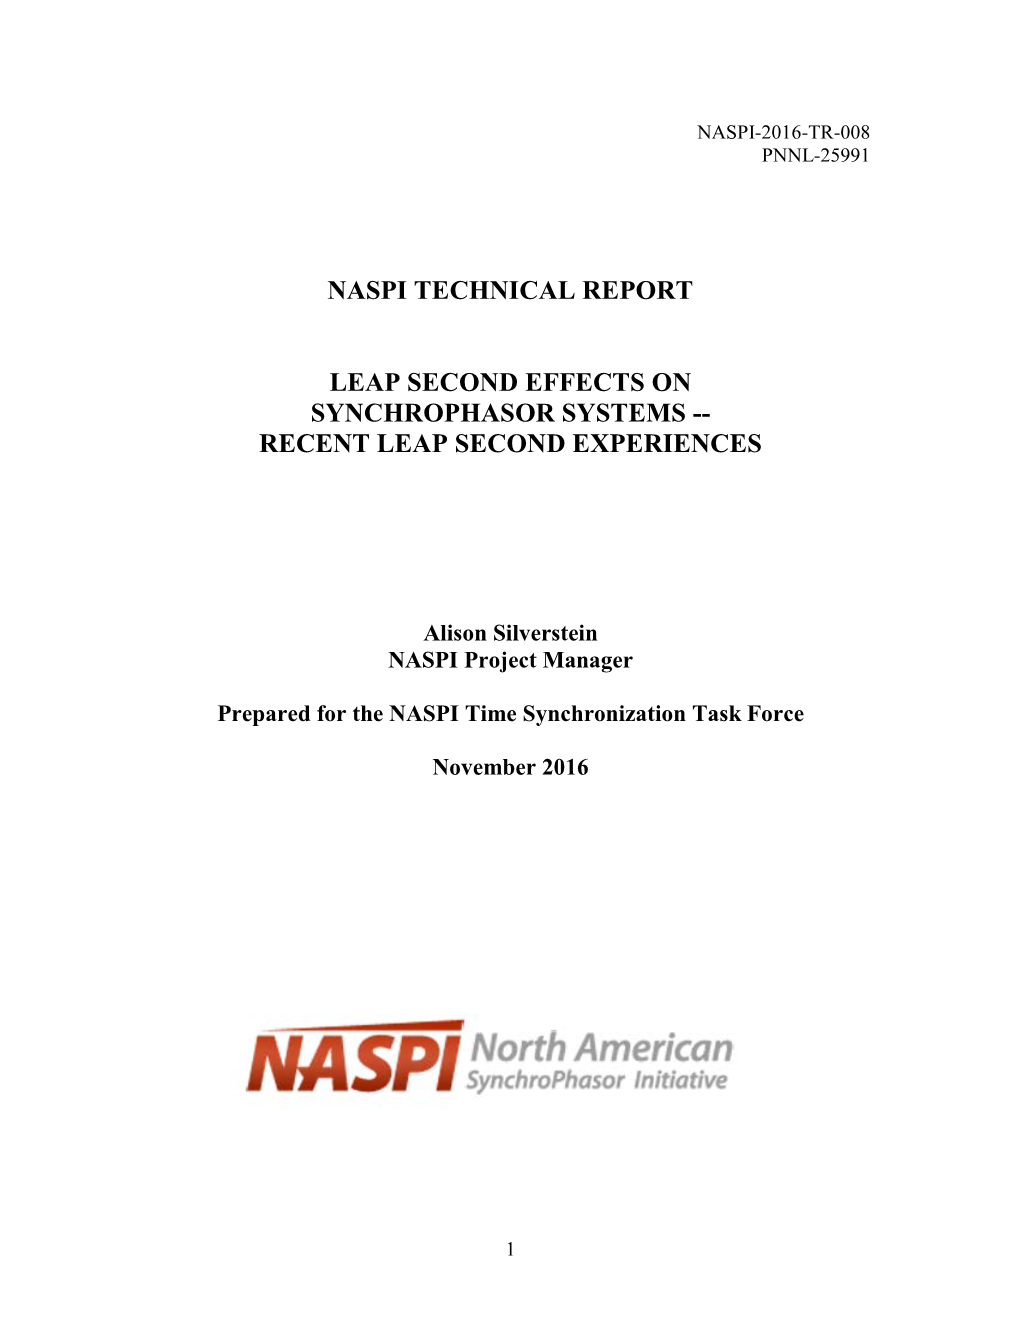 Naspi Technical Report Leap Second Effects on Synchrophasor Systems